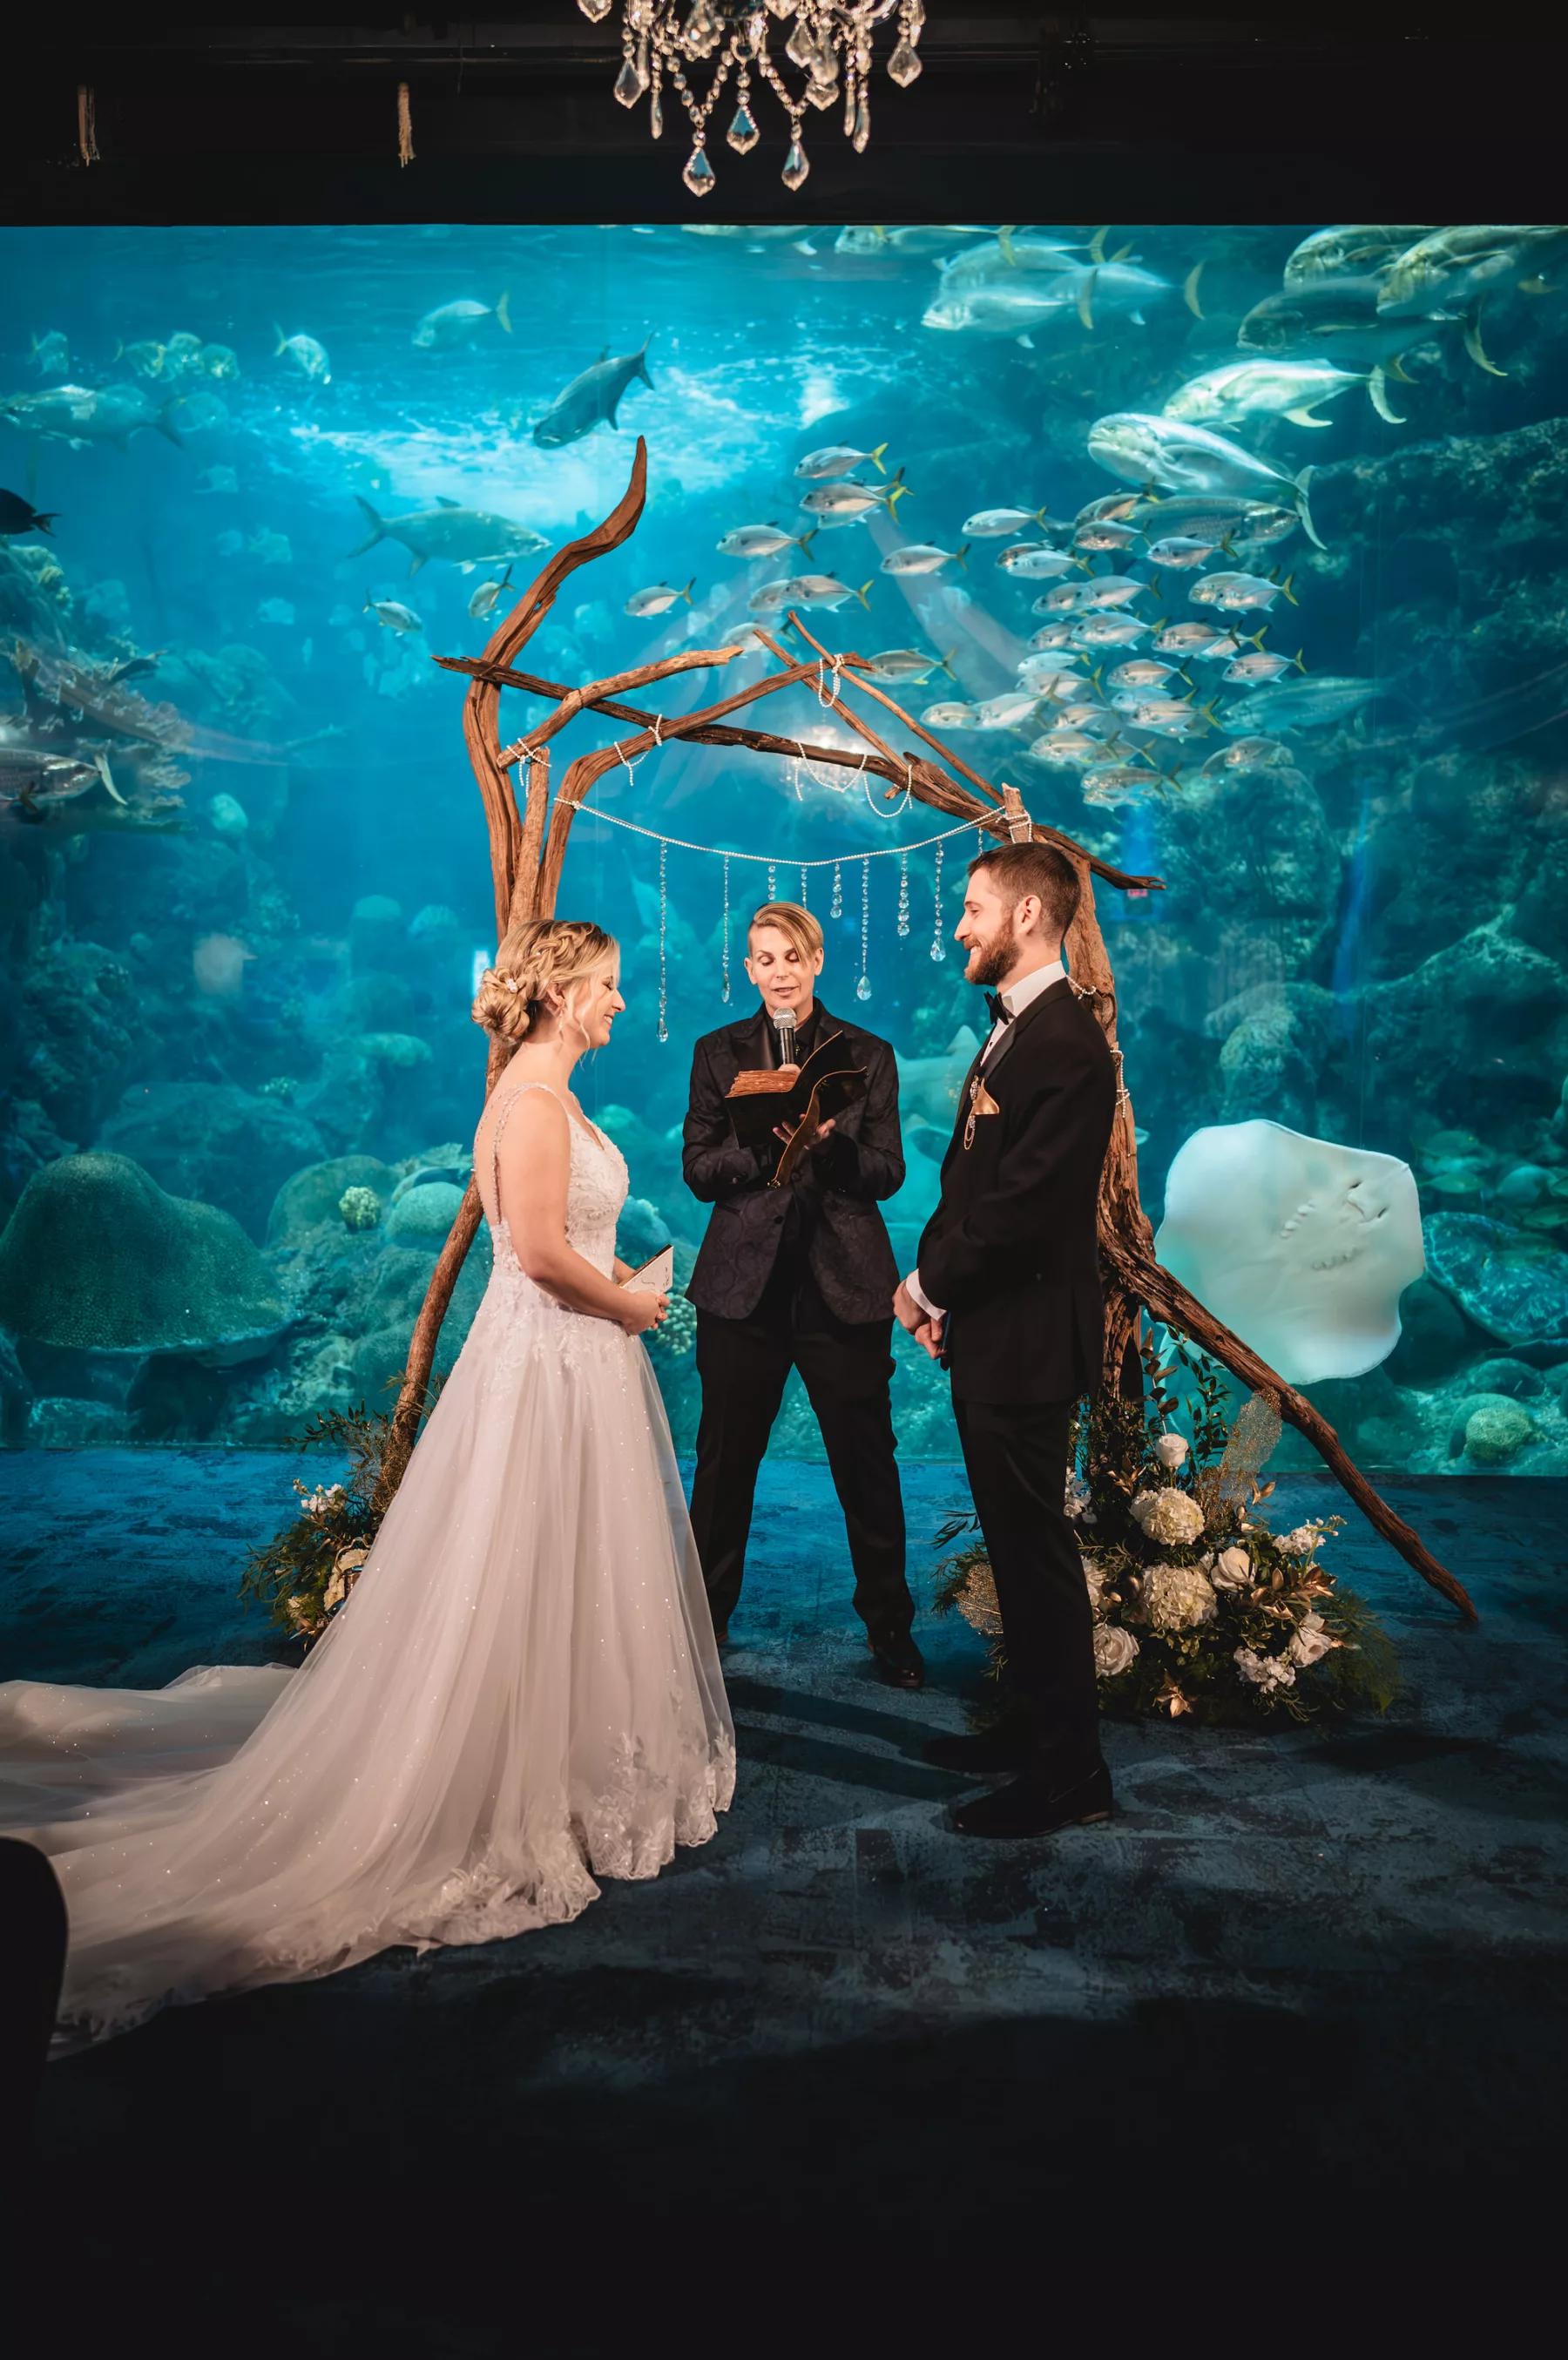 Nautical Inspired Coral Reef Gallery Fall Wedding Ceremony | Drift Wood Arch Ideas | Tampa Bay Event Venue The Florida Aquarium